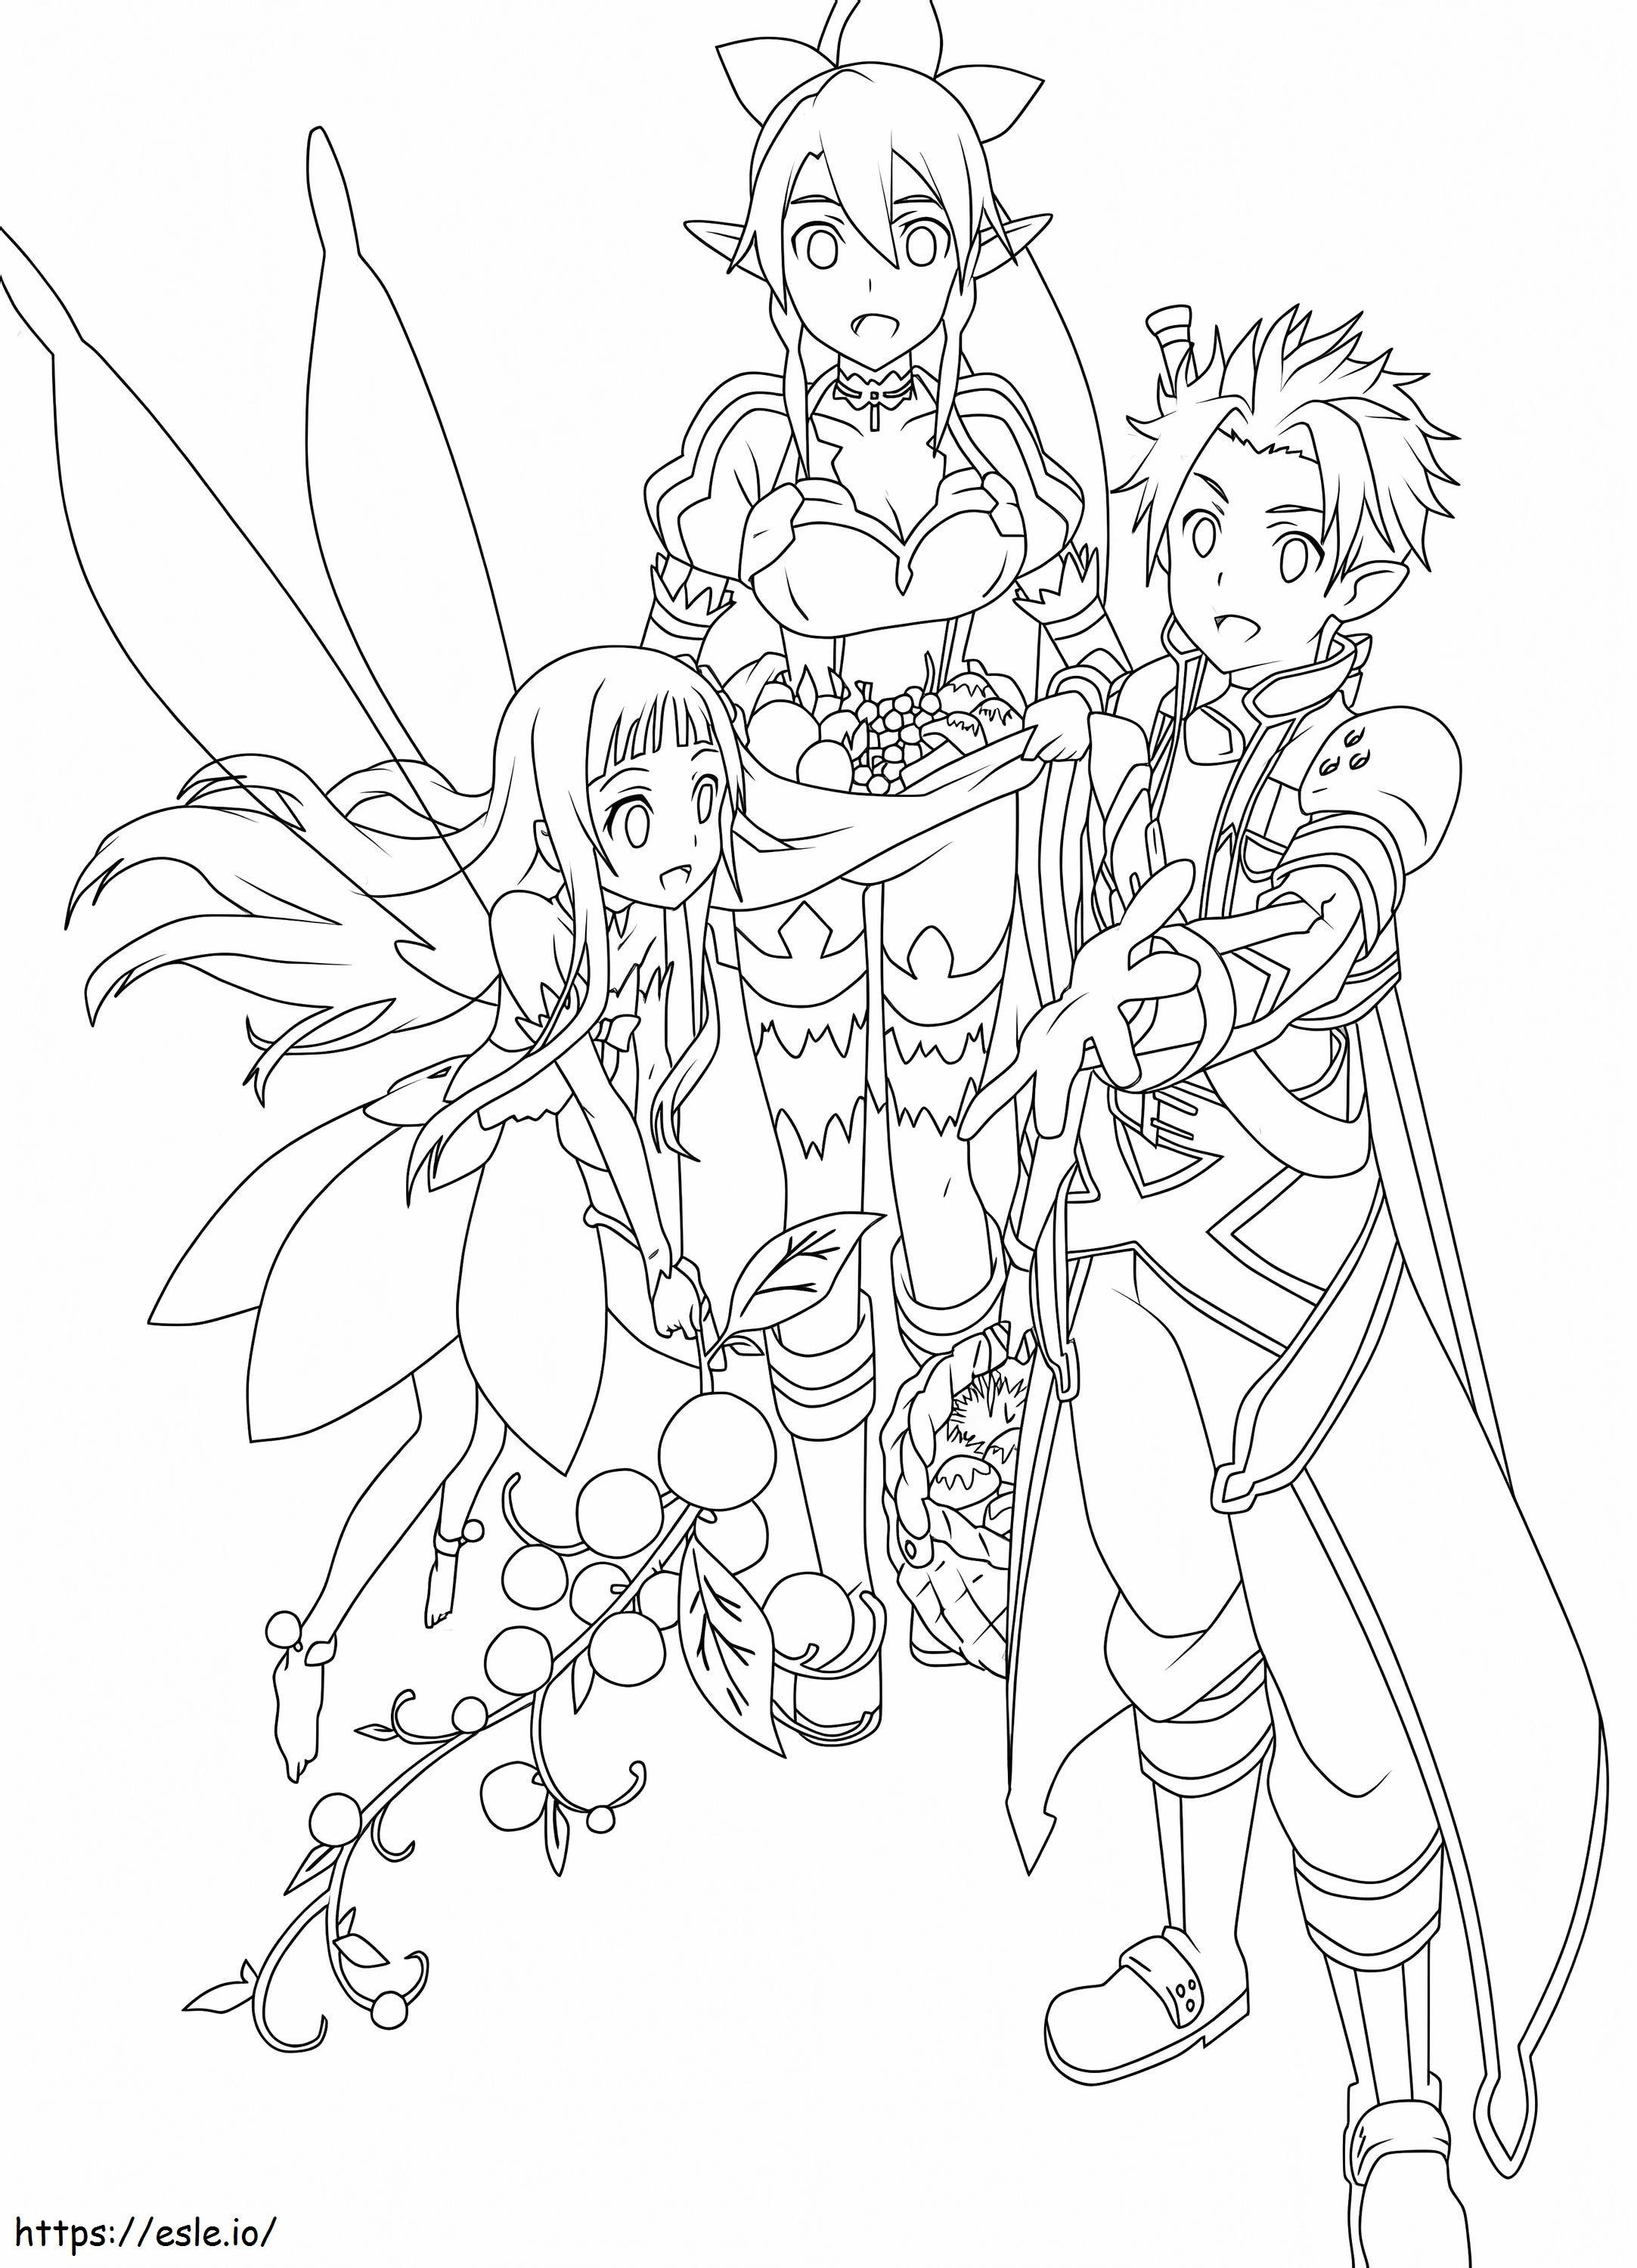 Anime Family coloring page